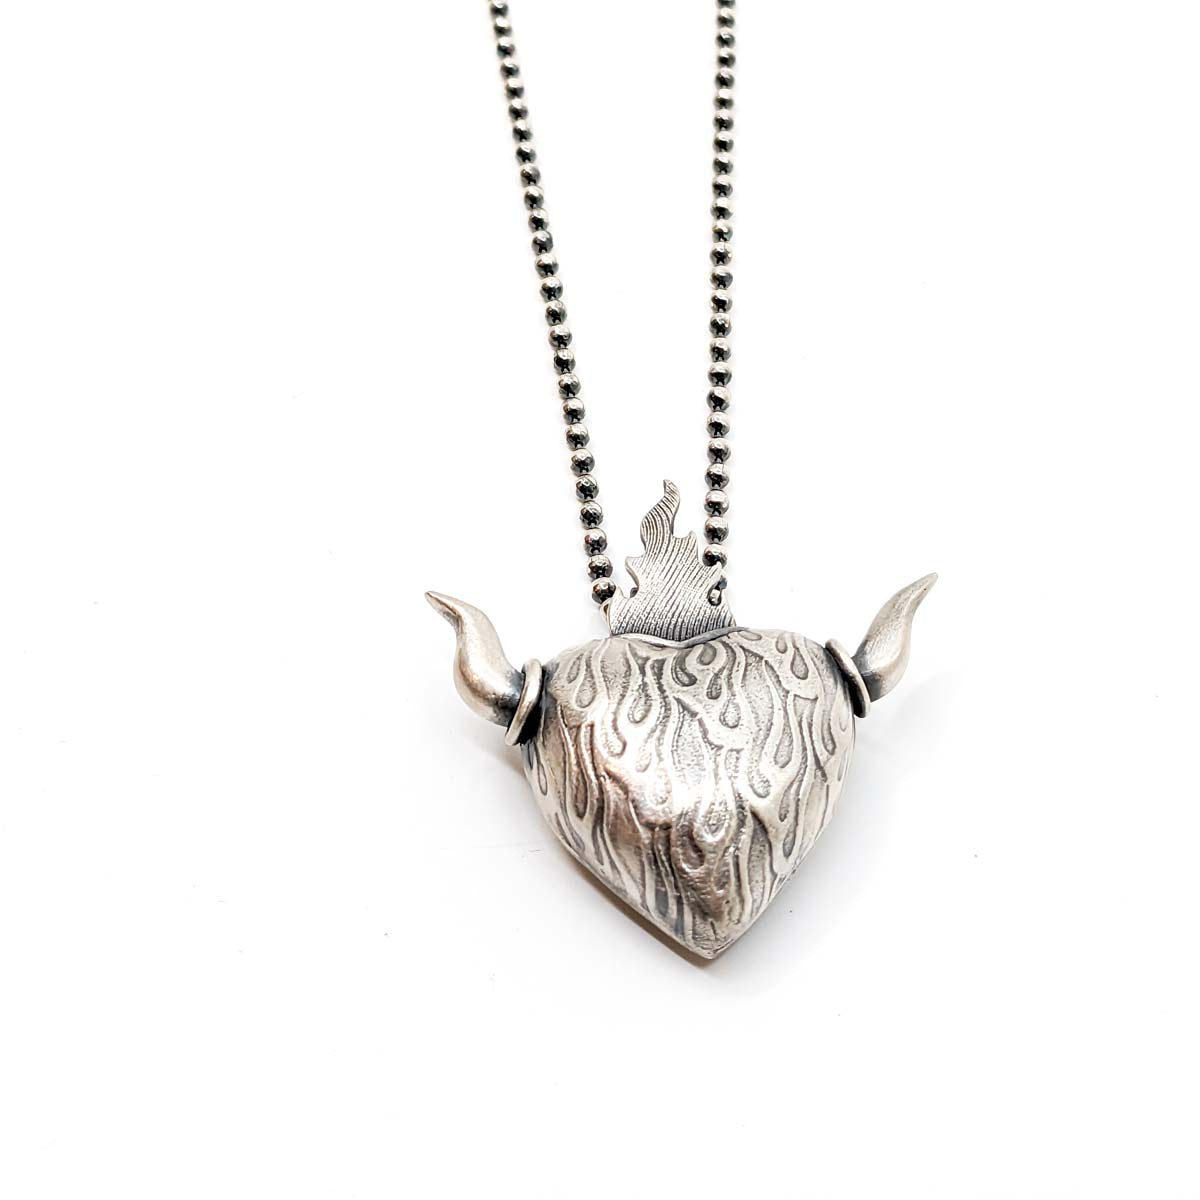 Passion/ Heart with Horus and Flames Necklace